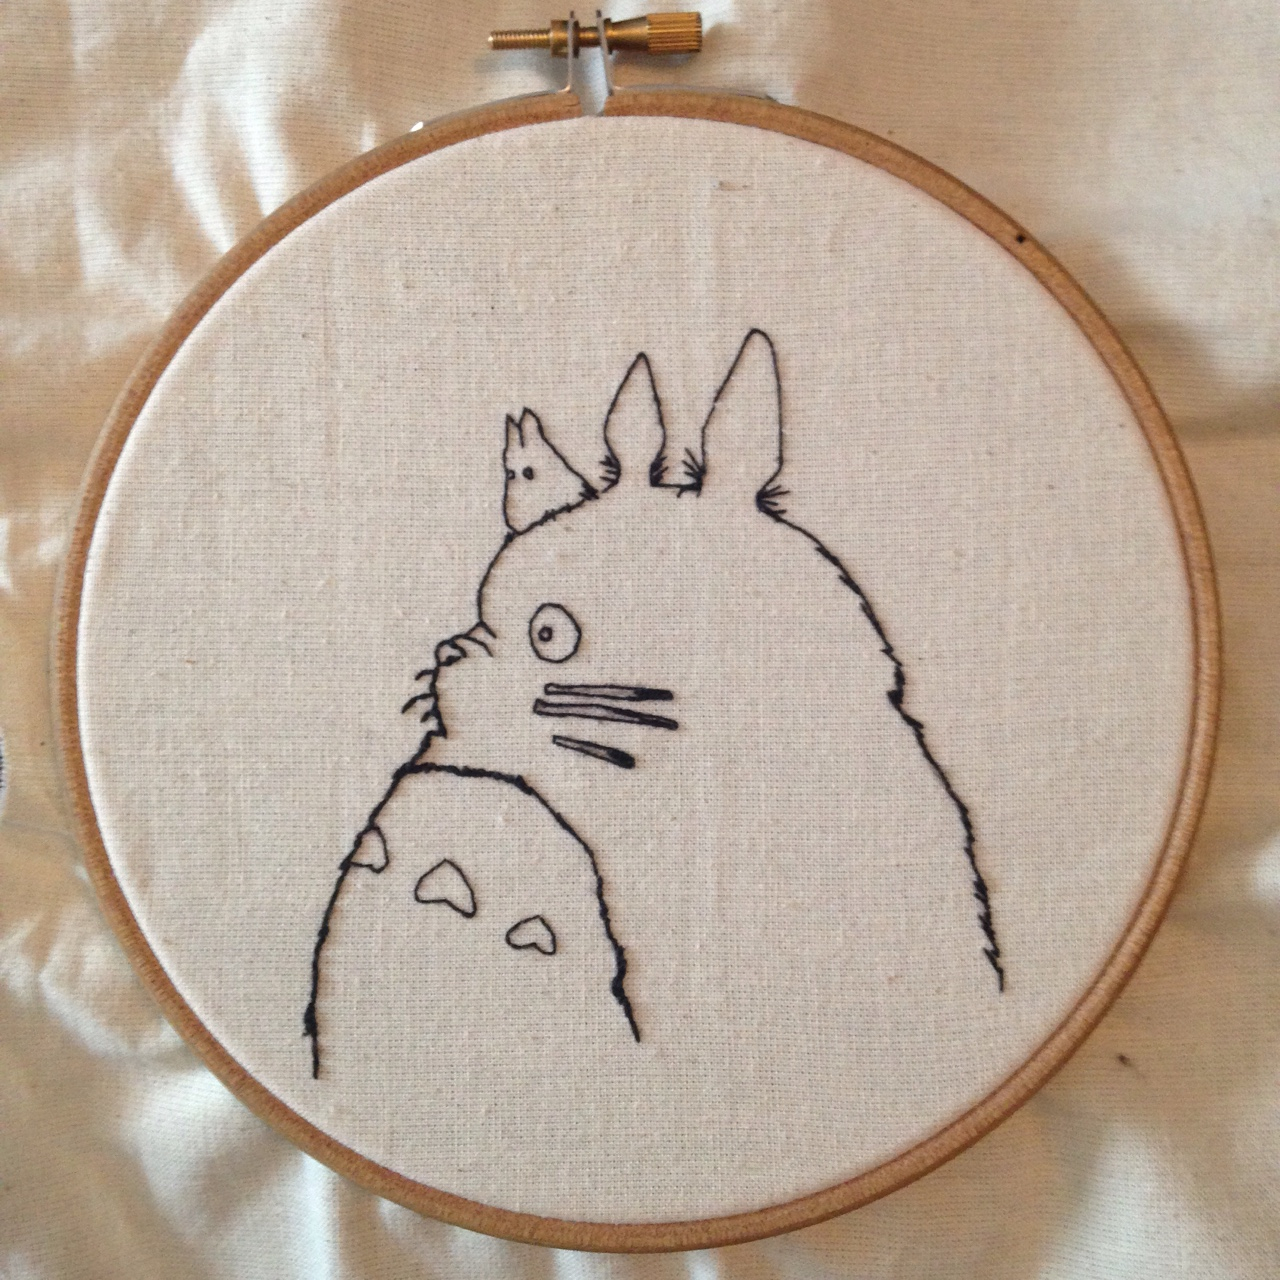 Totoro Embroidery Pattern My Neighbour Totoro Hand Embroidery Super Cute Depop